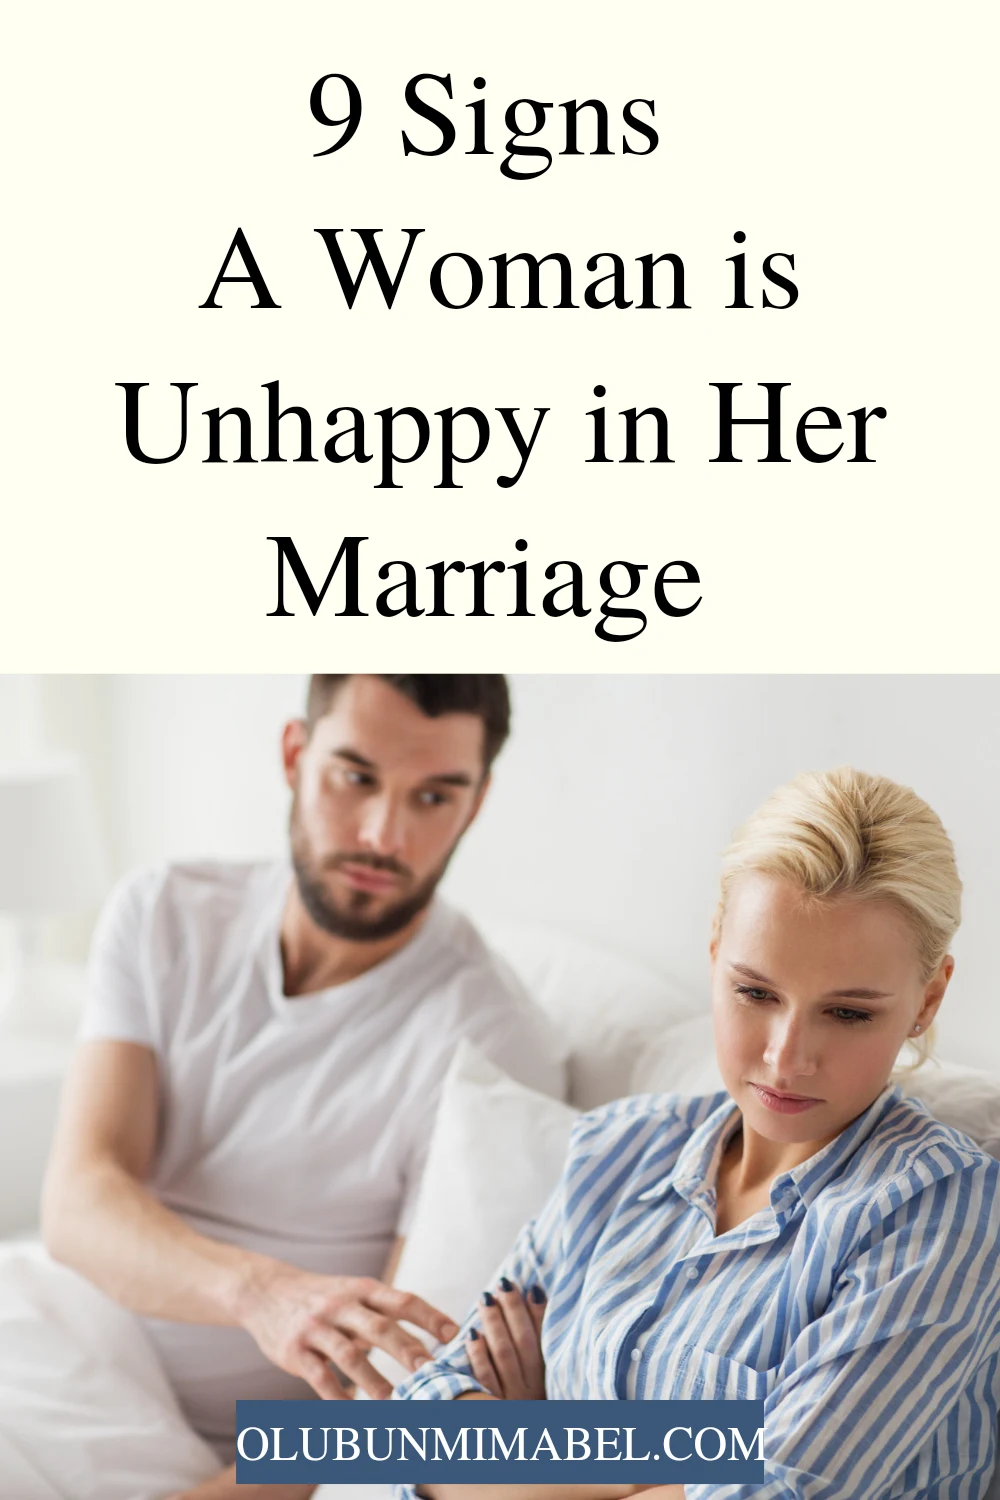 Signs a woman is unhappy in her marriage 